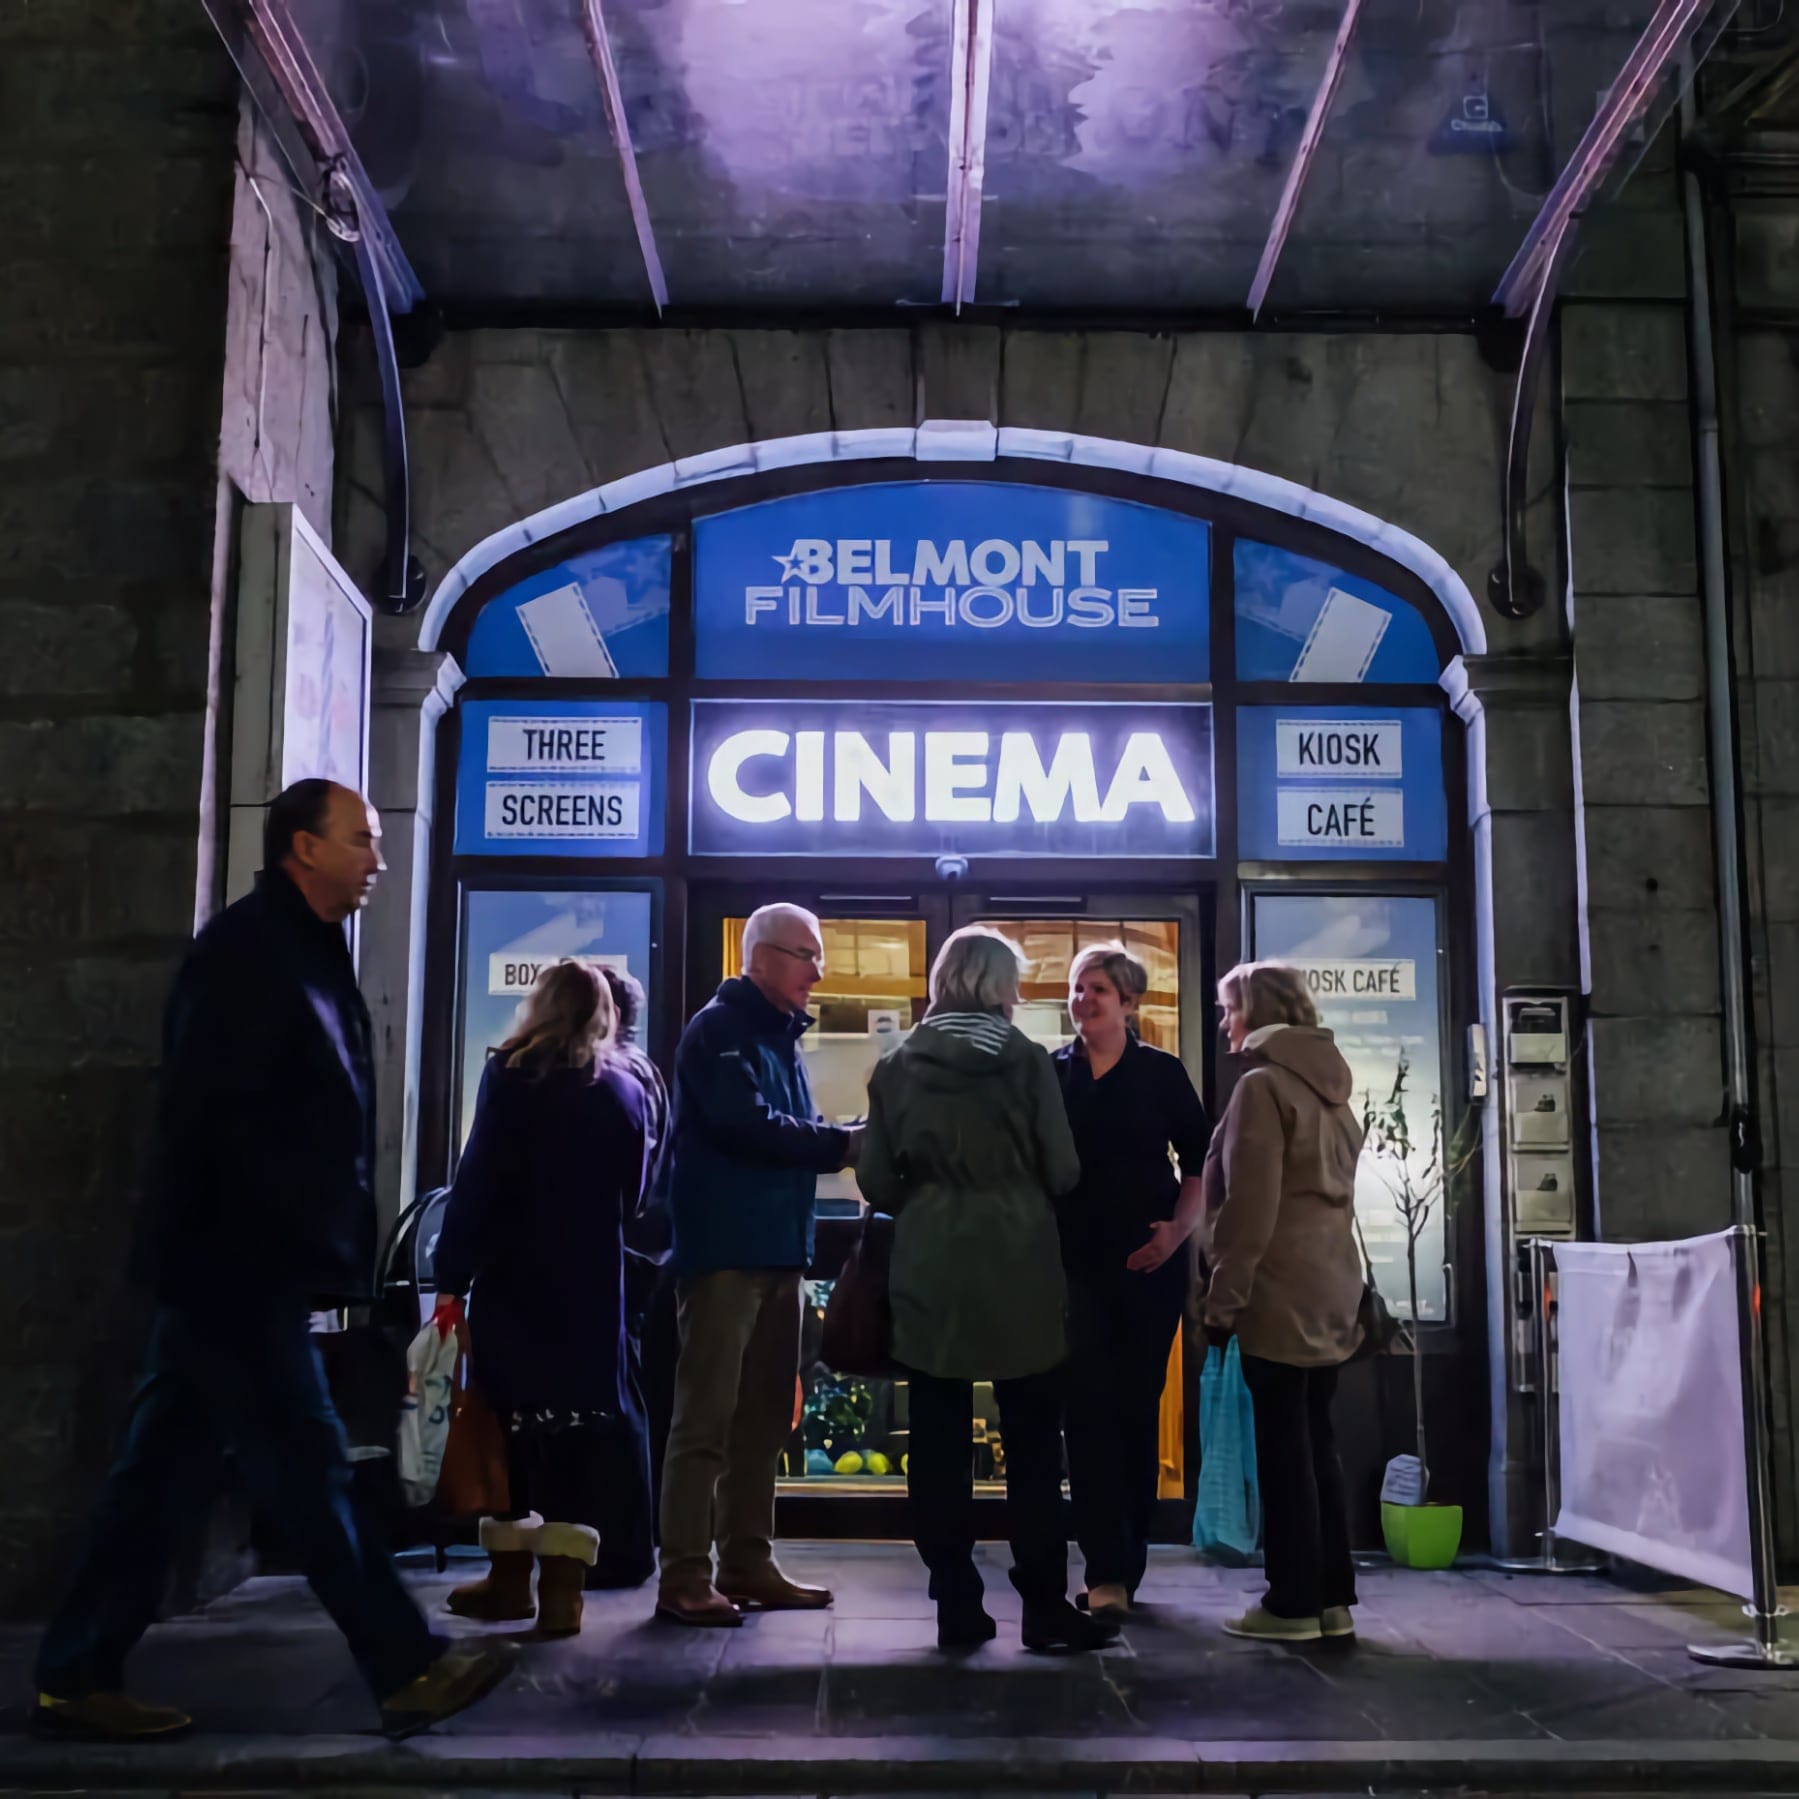 Aberdeen’s Cultural Scene Boosted by Belmont Cinema Fundraising Launch